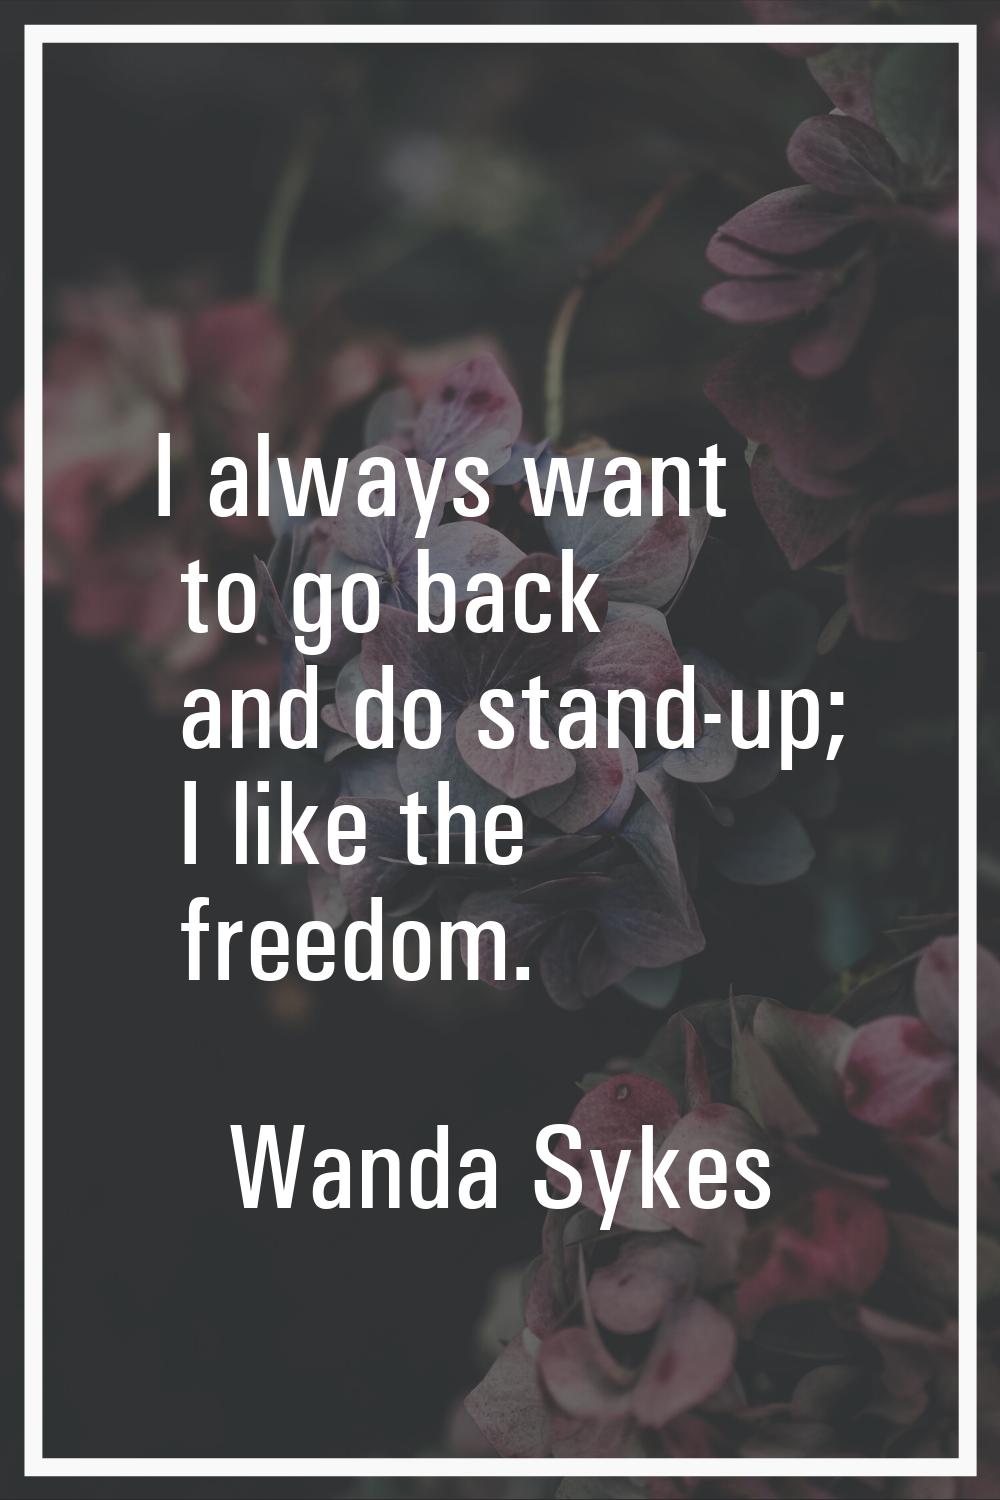 I always want to go back and do stand-up; I like the freedom.